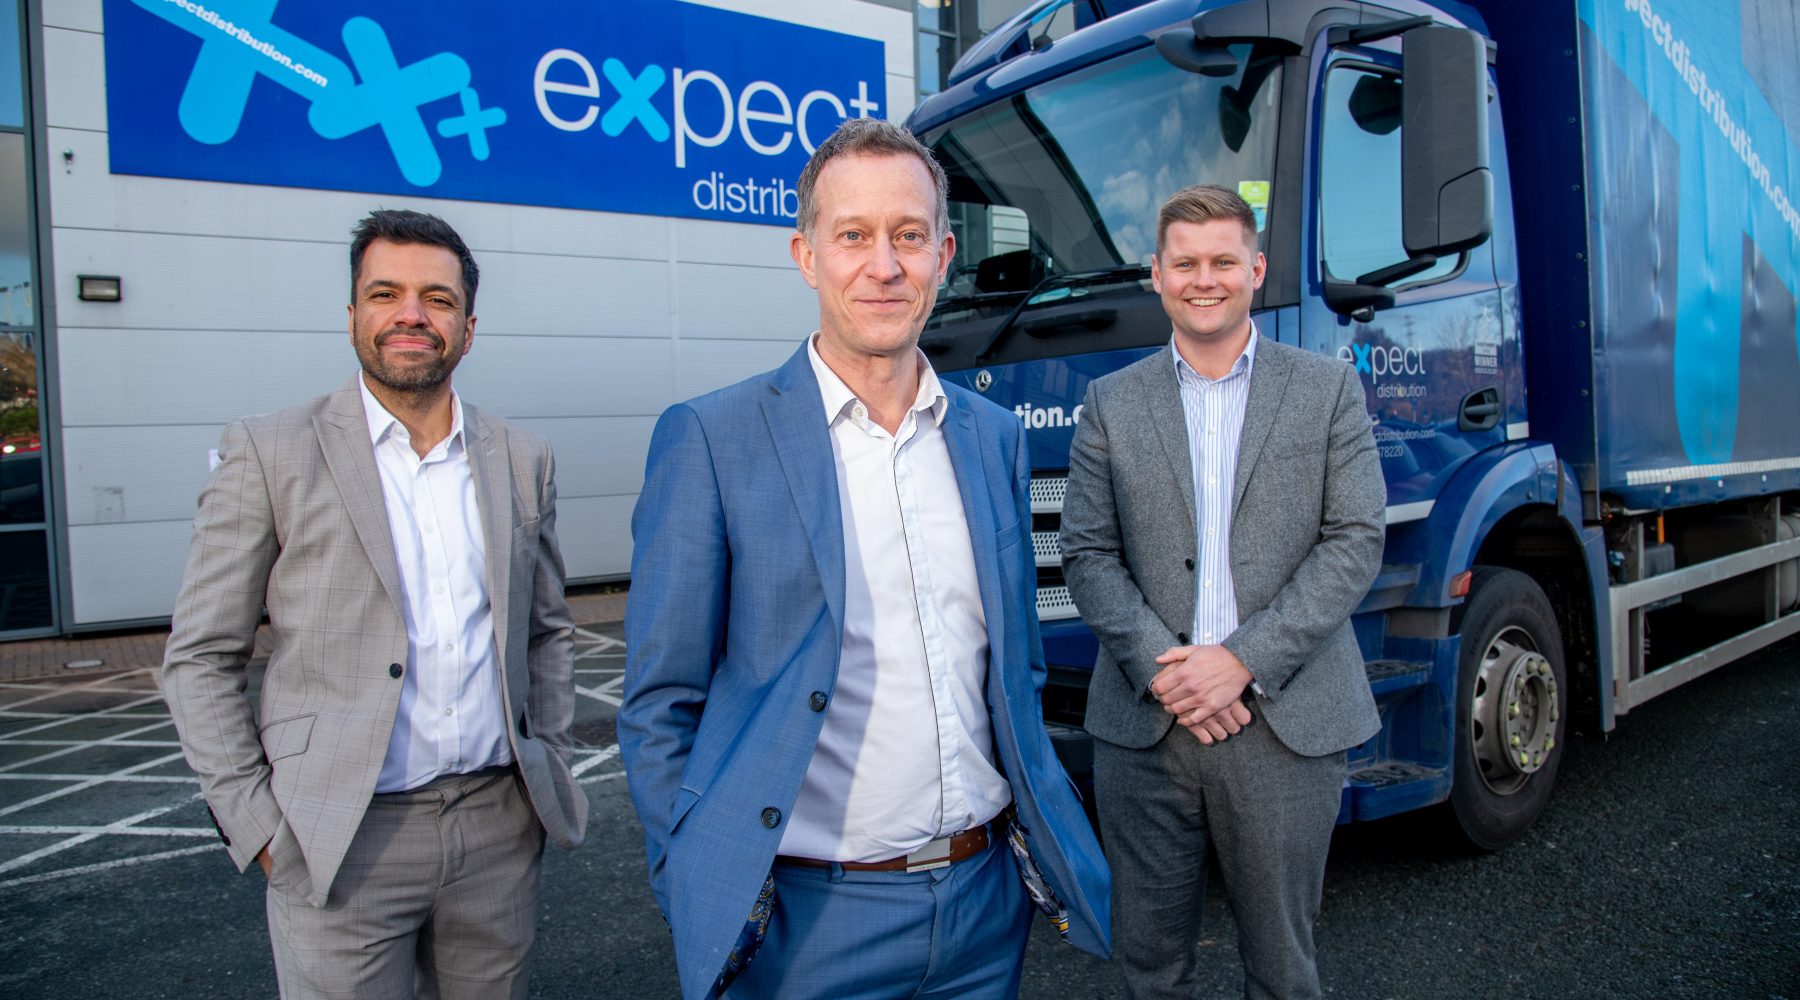 Change of Ownership at Expect through MBO